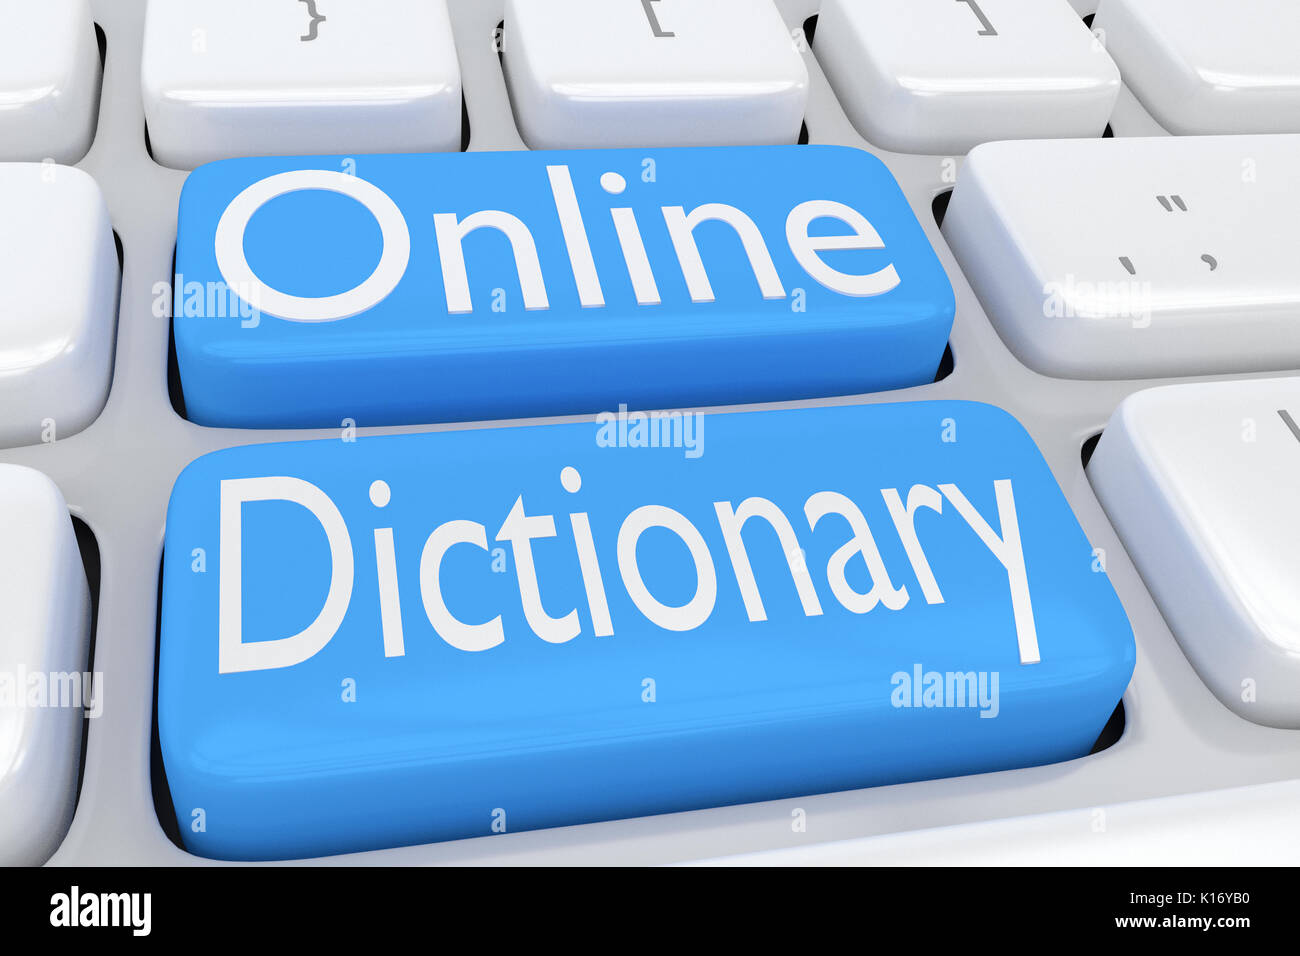 3D illustration of computer keyboard with the script 'Online Dictionary' on two adjacent pale blue buttons Stock Photo